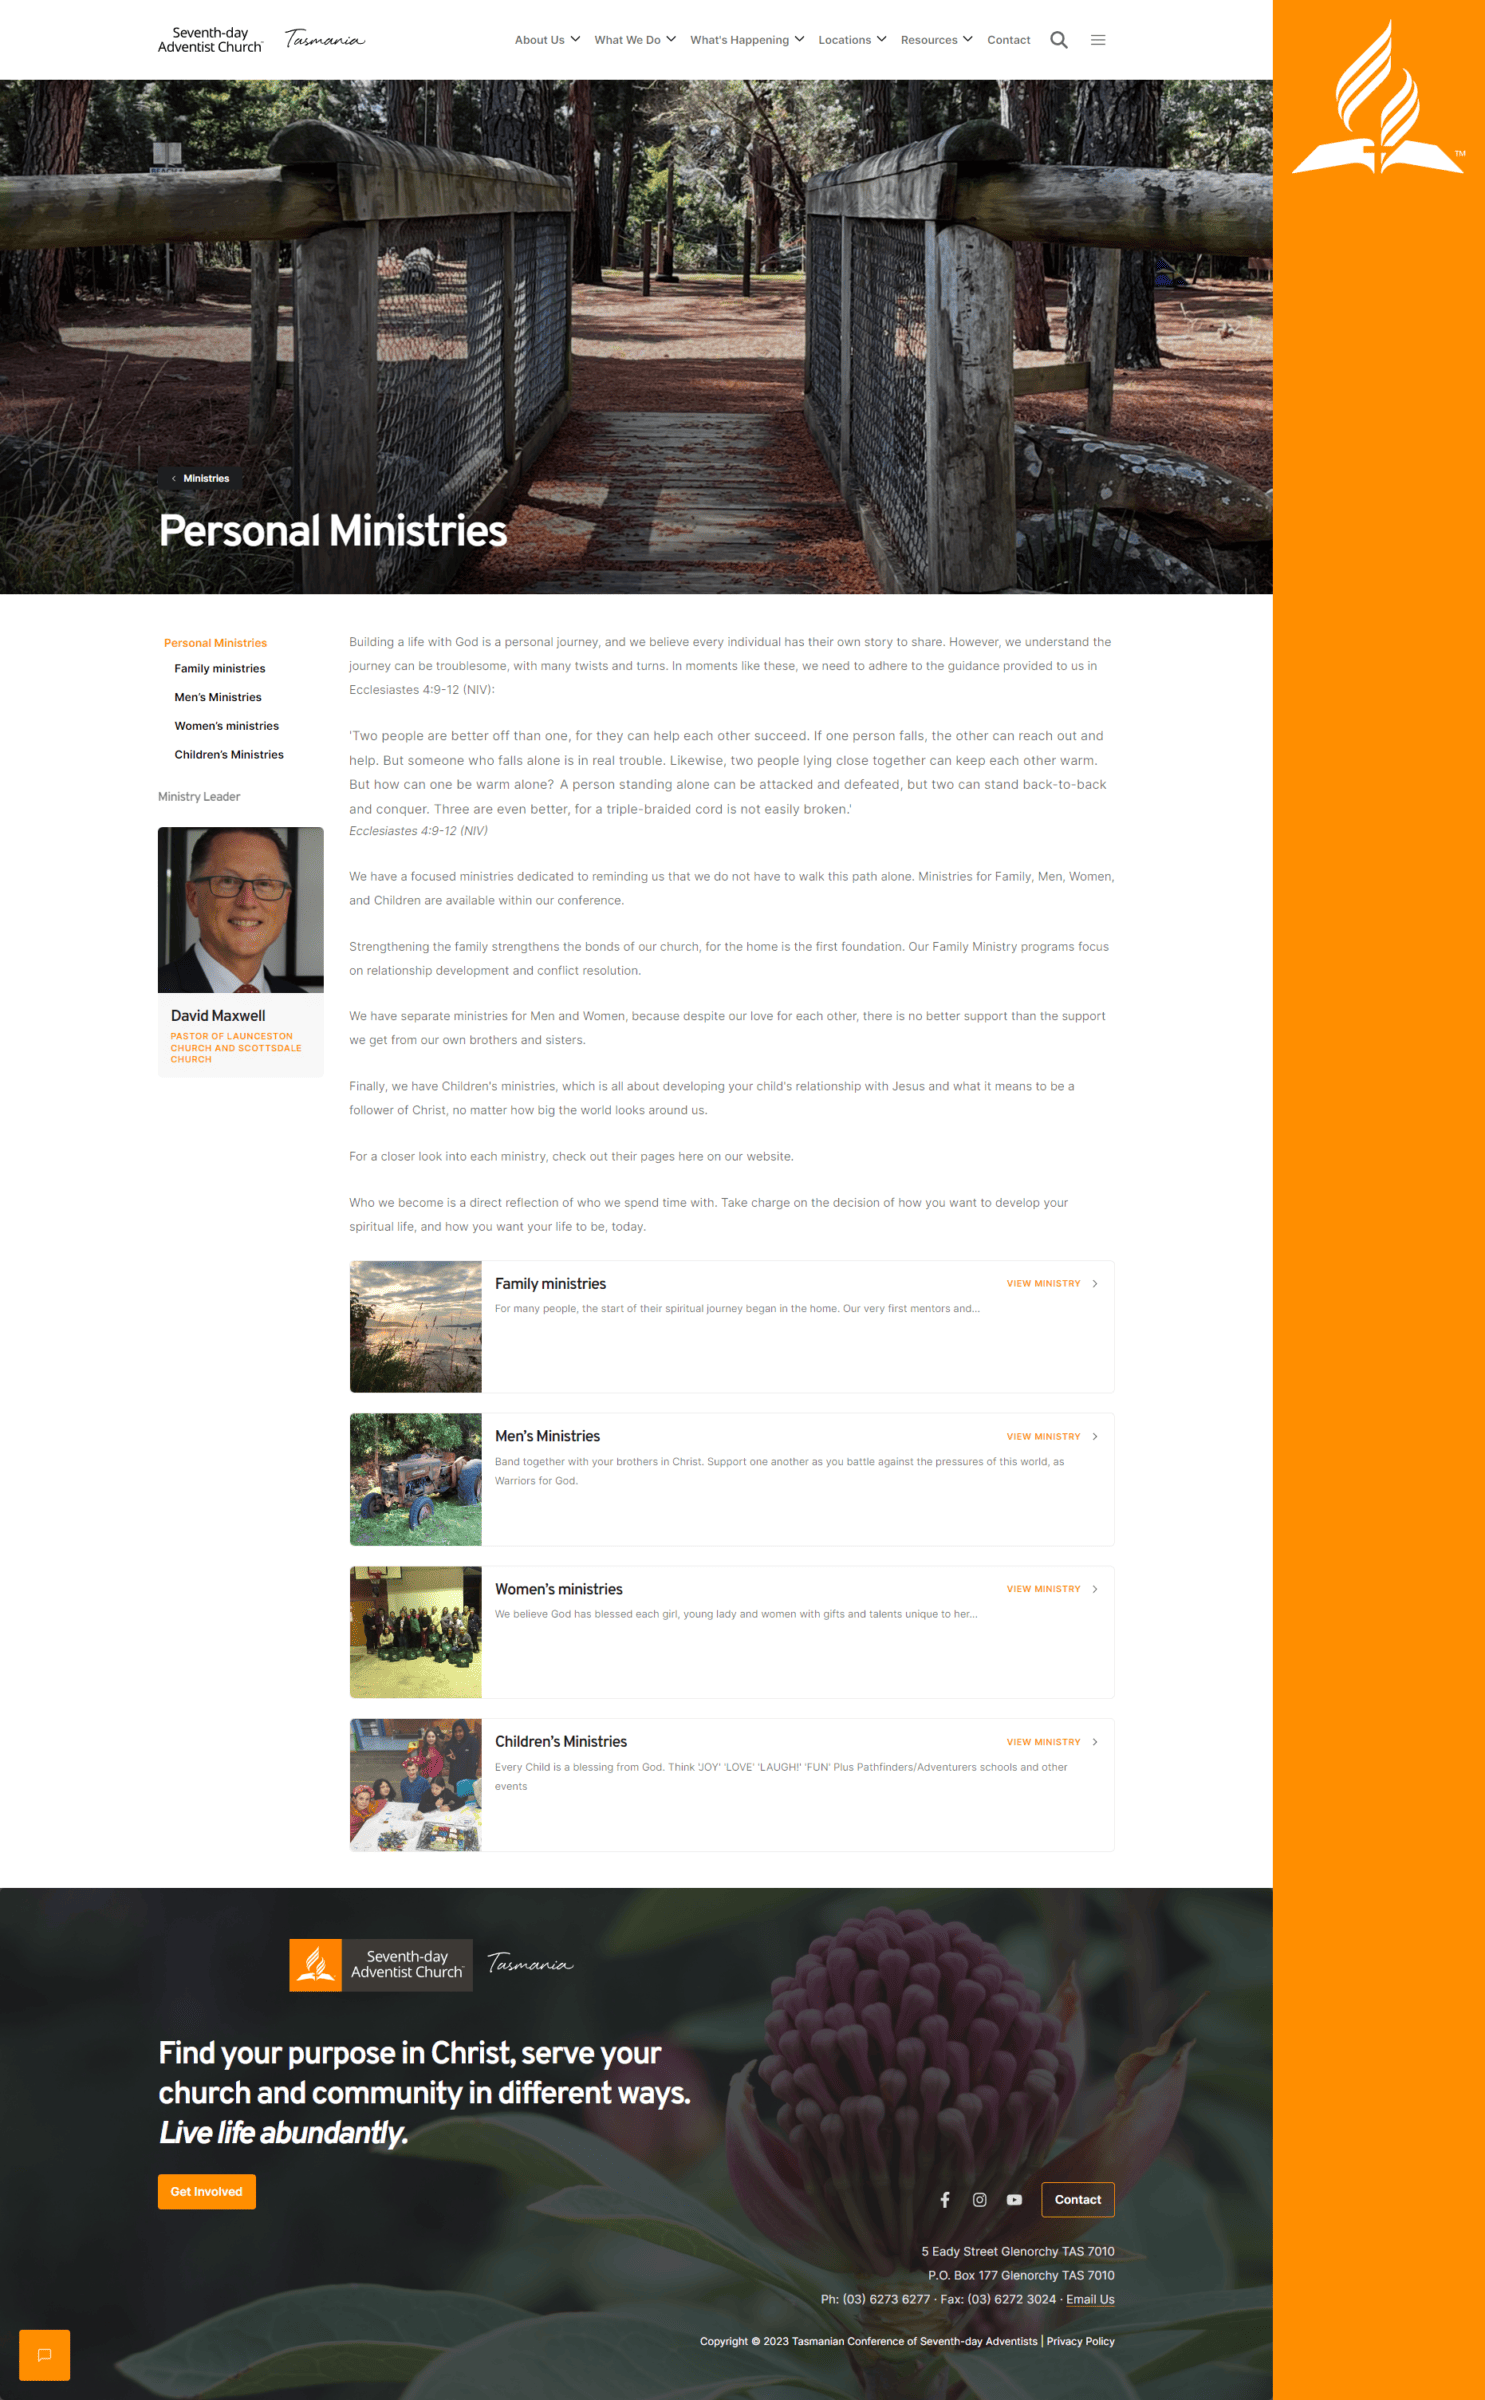 A website design with an orange and white background.